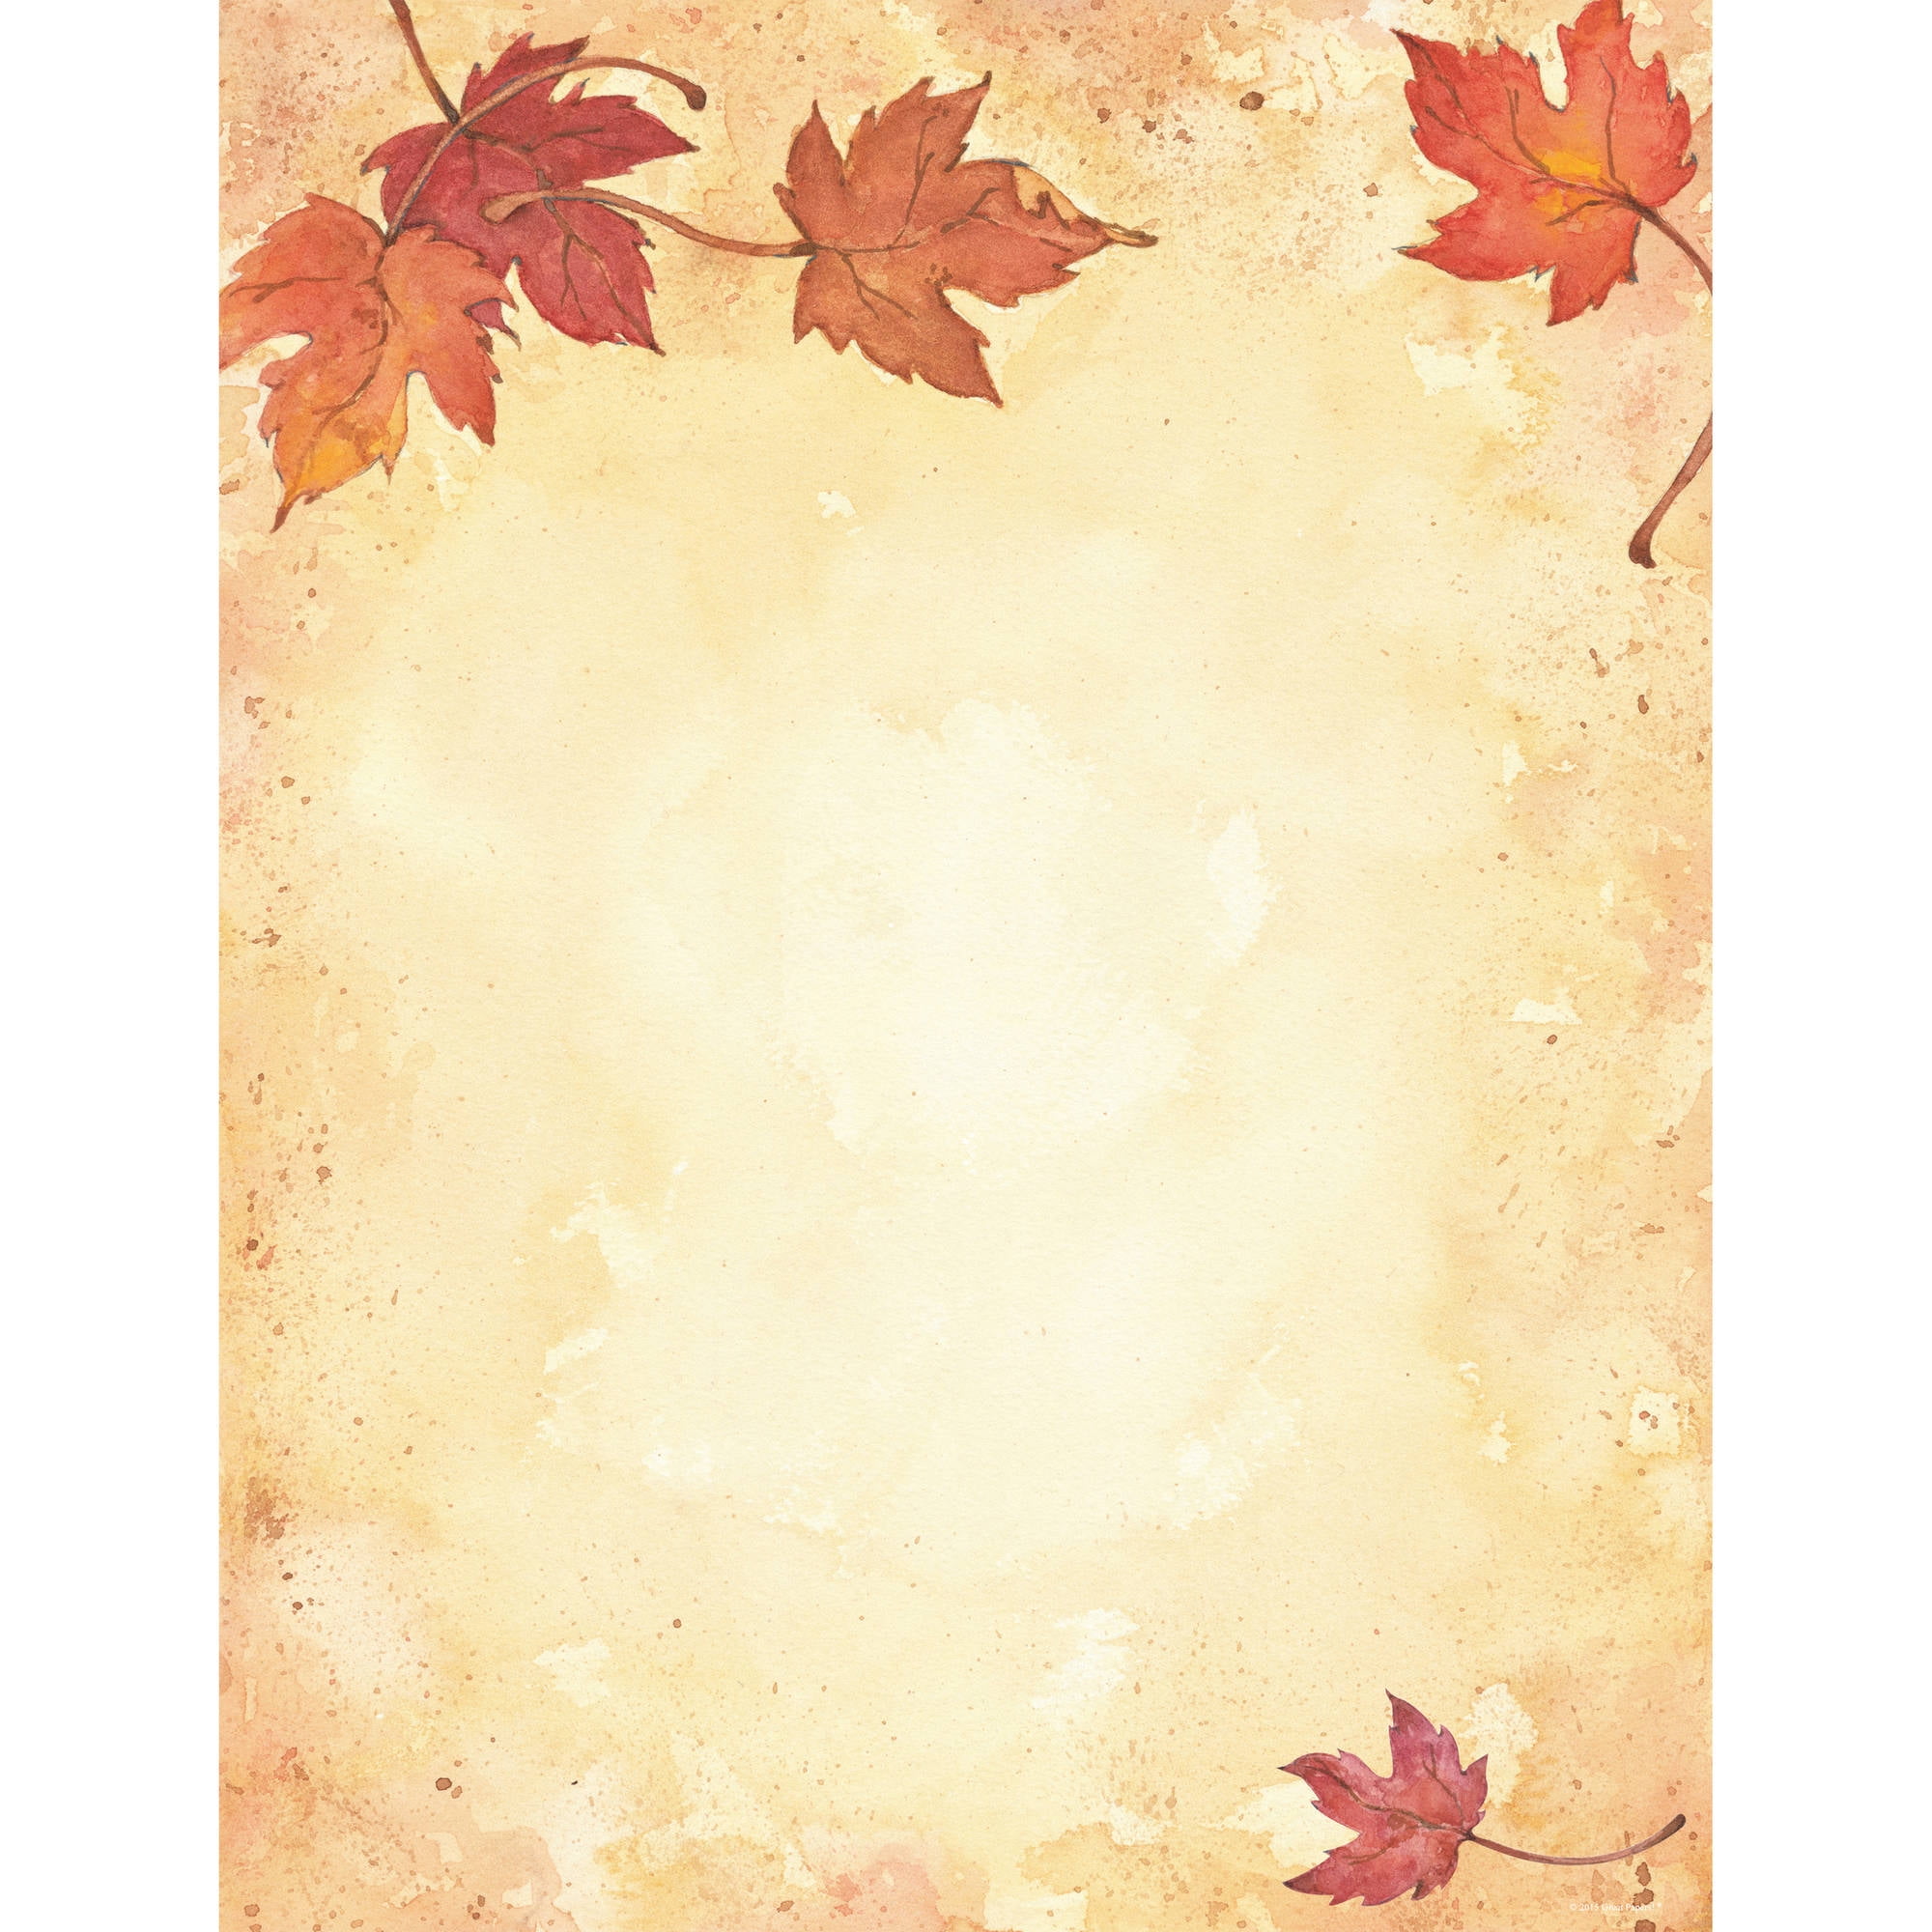 Great Papers Fall Leaves Letterhead 25 Count Walmart